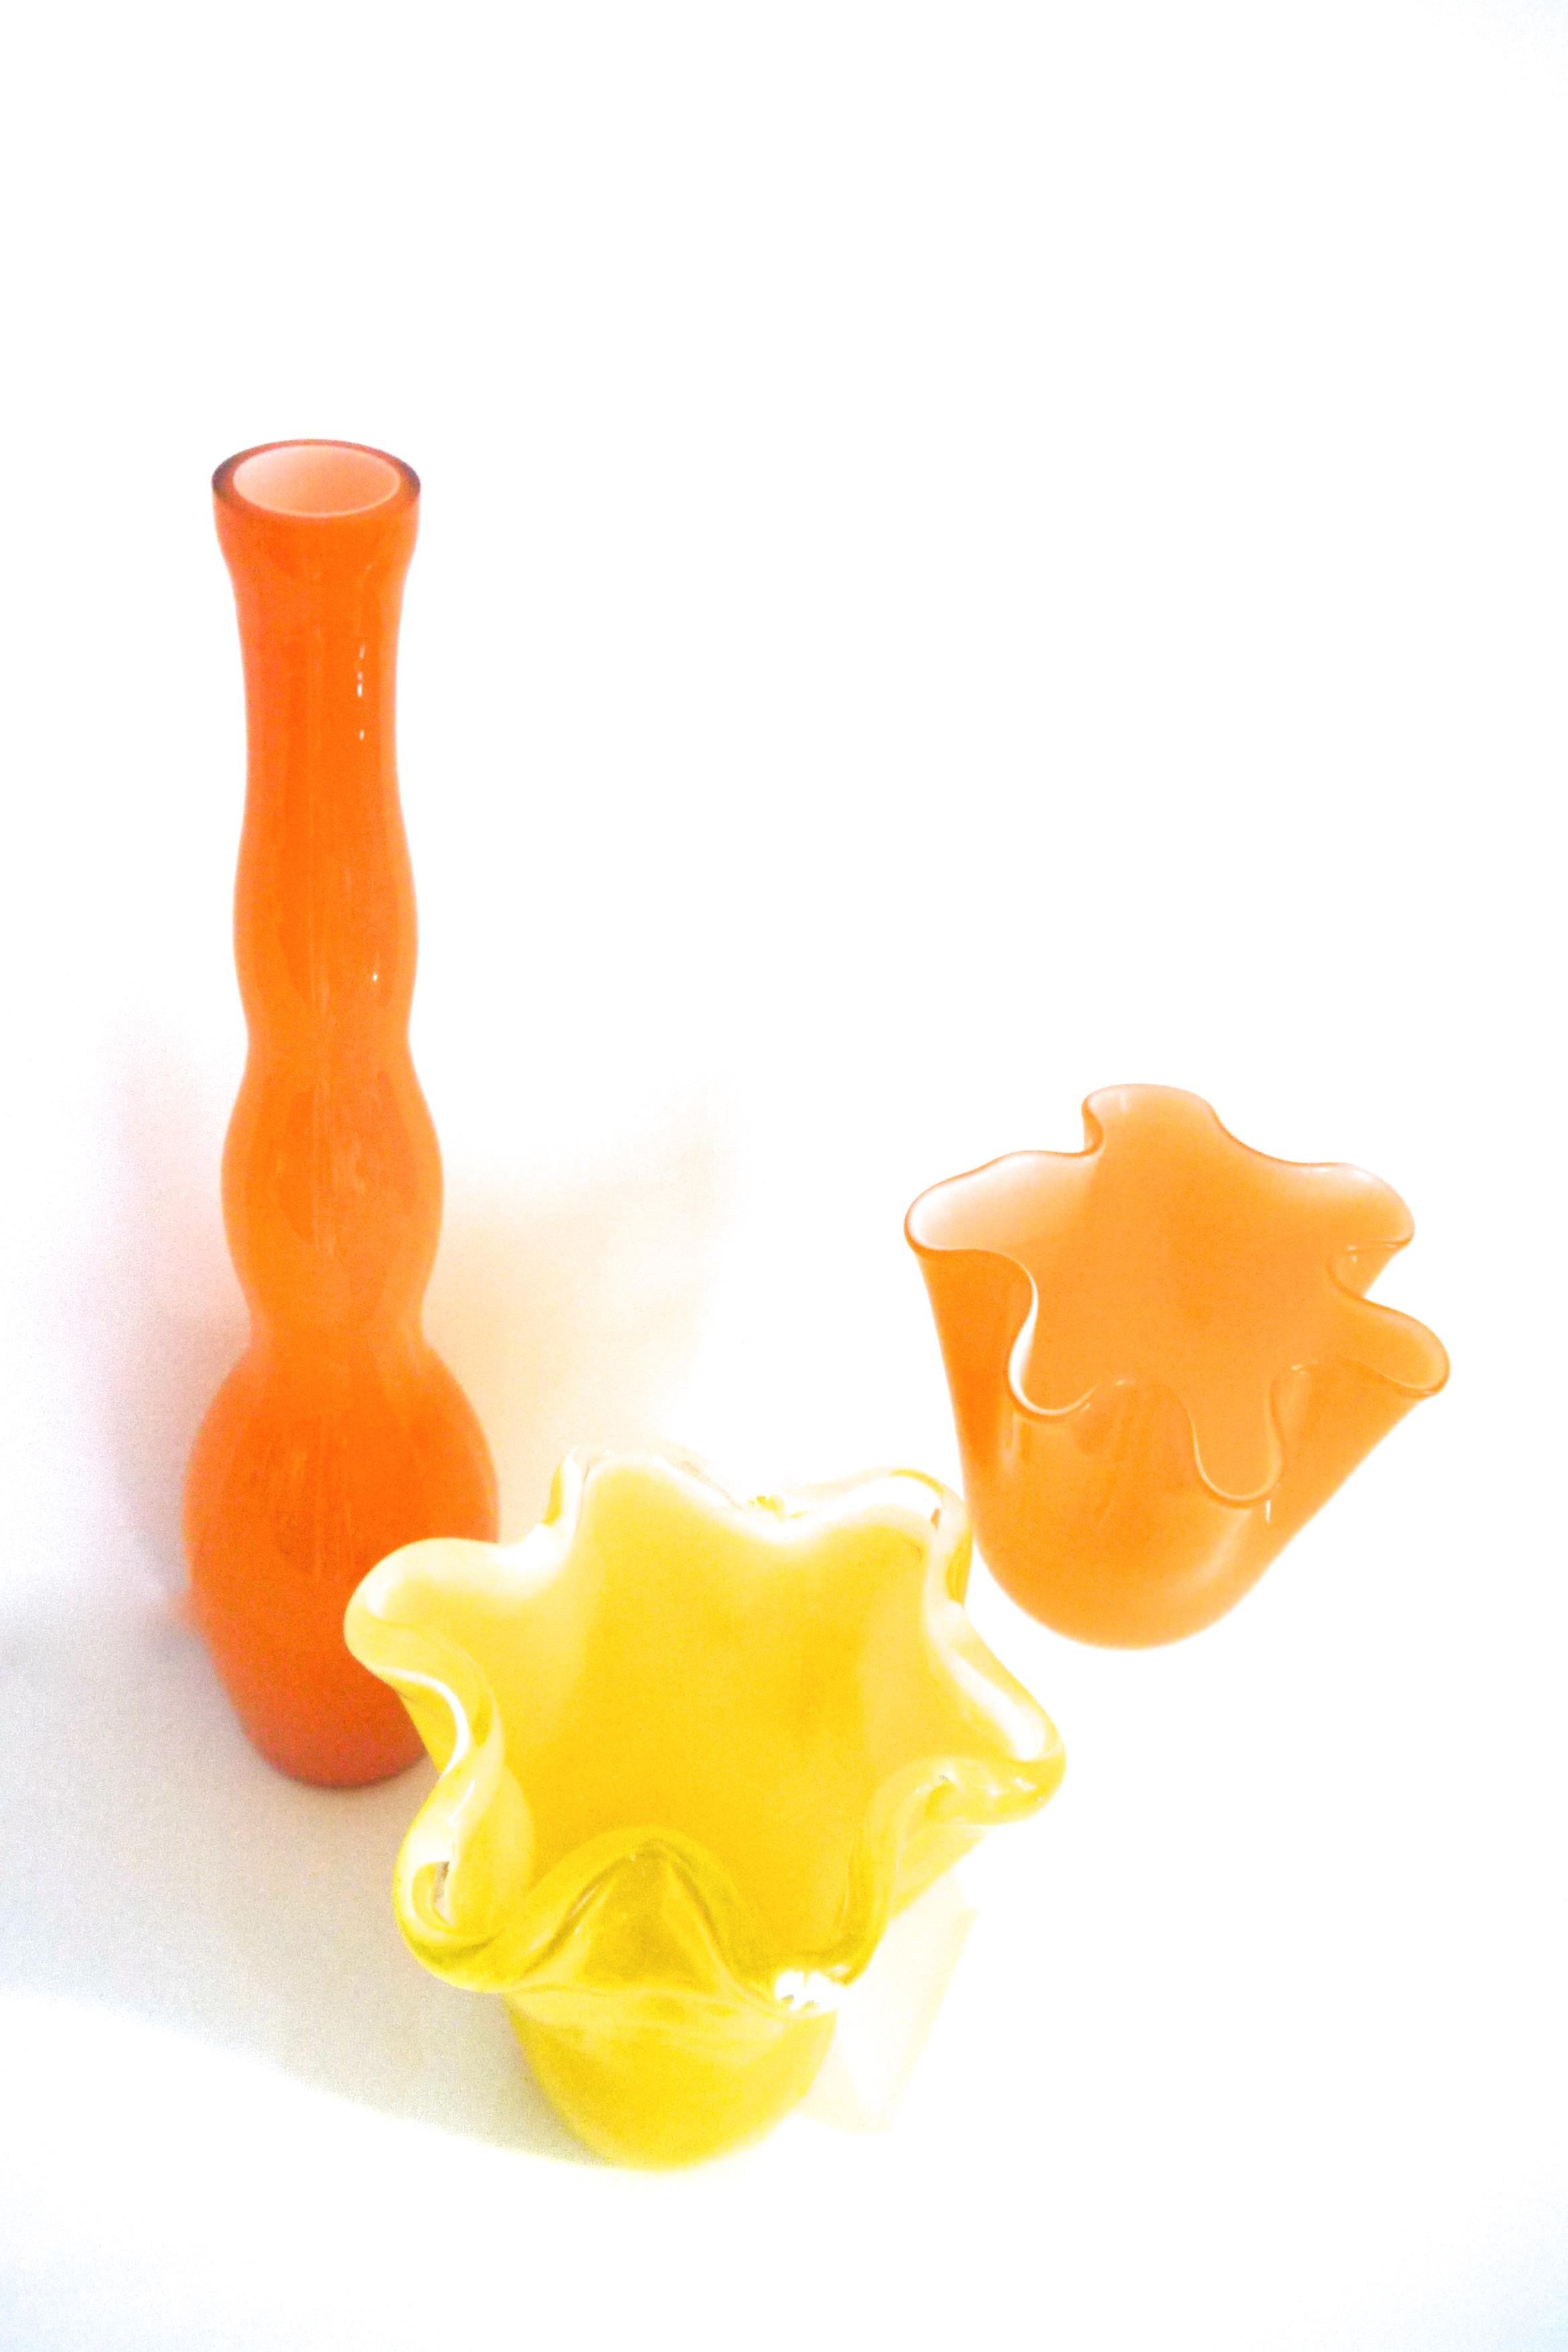 Pop Art modernist 1960s collection two Murano Fazzoletti and 'Twist' vase by Alstefors
The due fazoletti are both slightly irregular which indicates they are handmade and of the period. For over 50 years it they have been featured in museums and